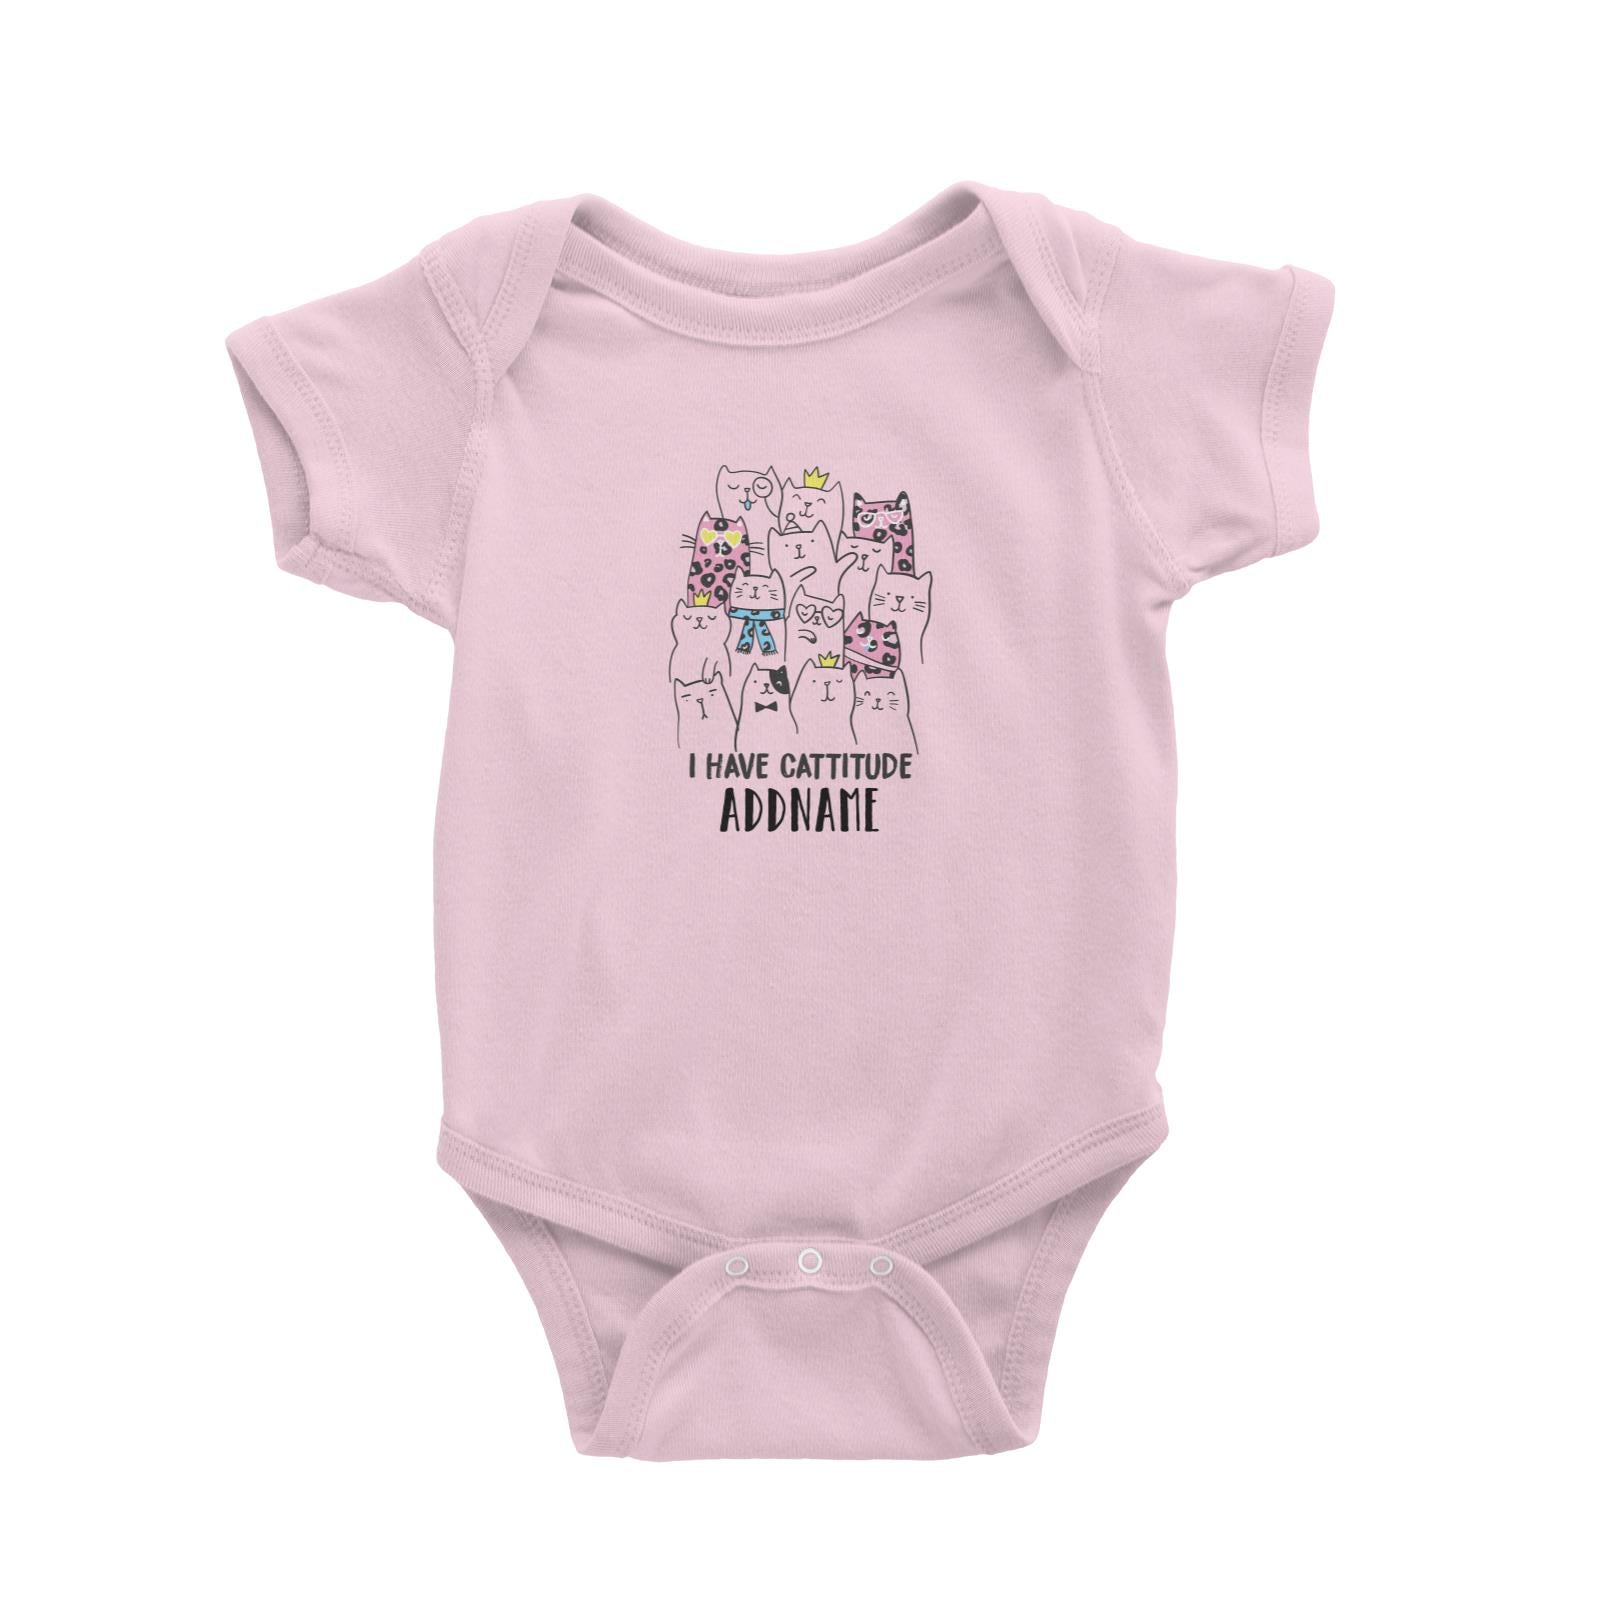 Cool Vibrant Series I Have Cattitude Addname Baby Romper